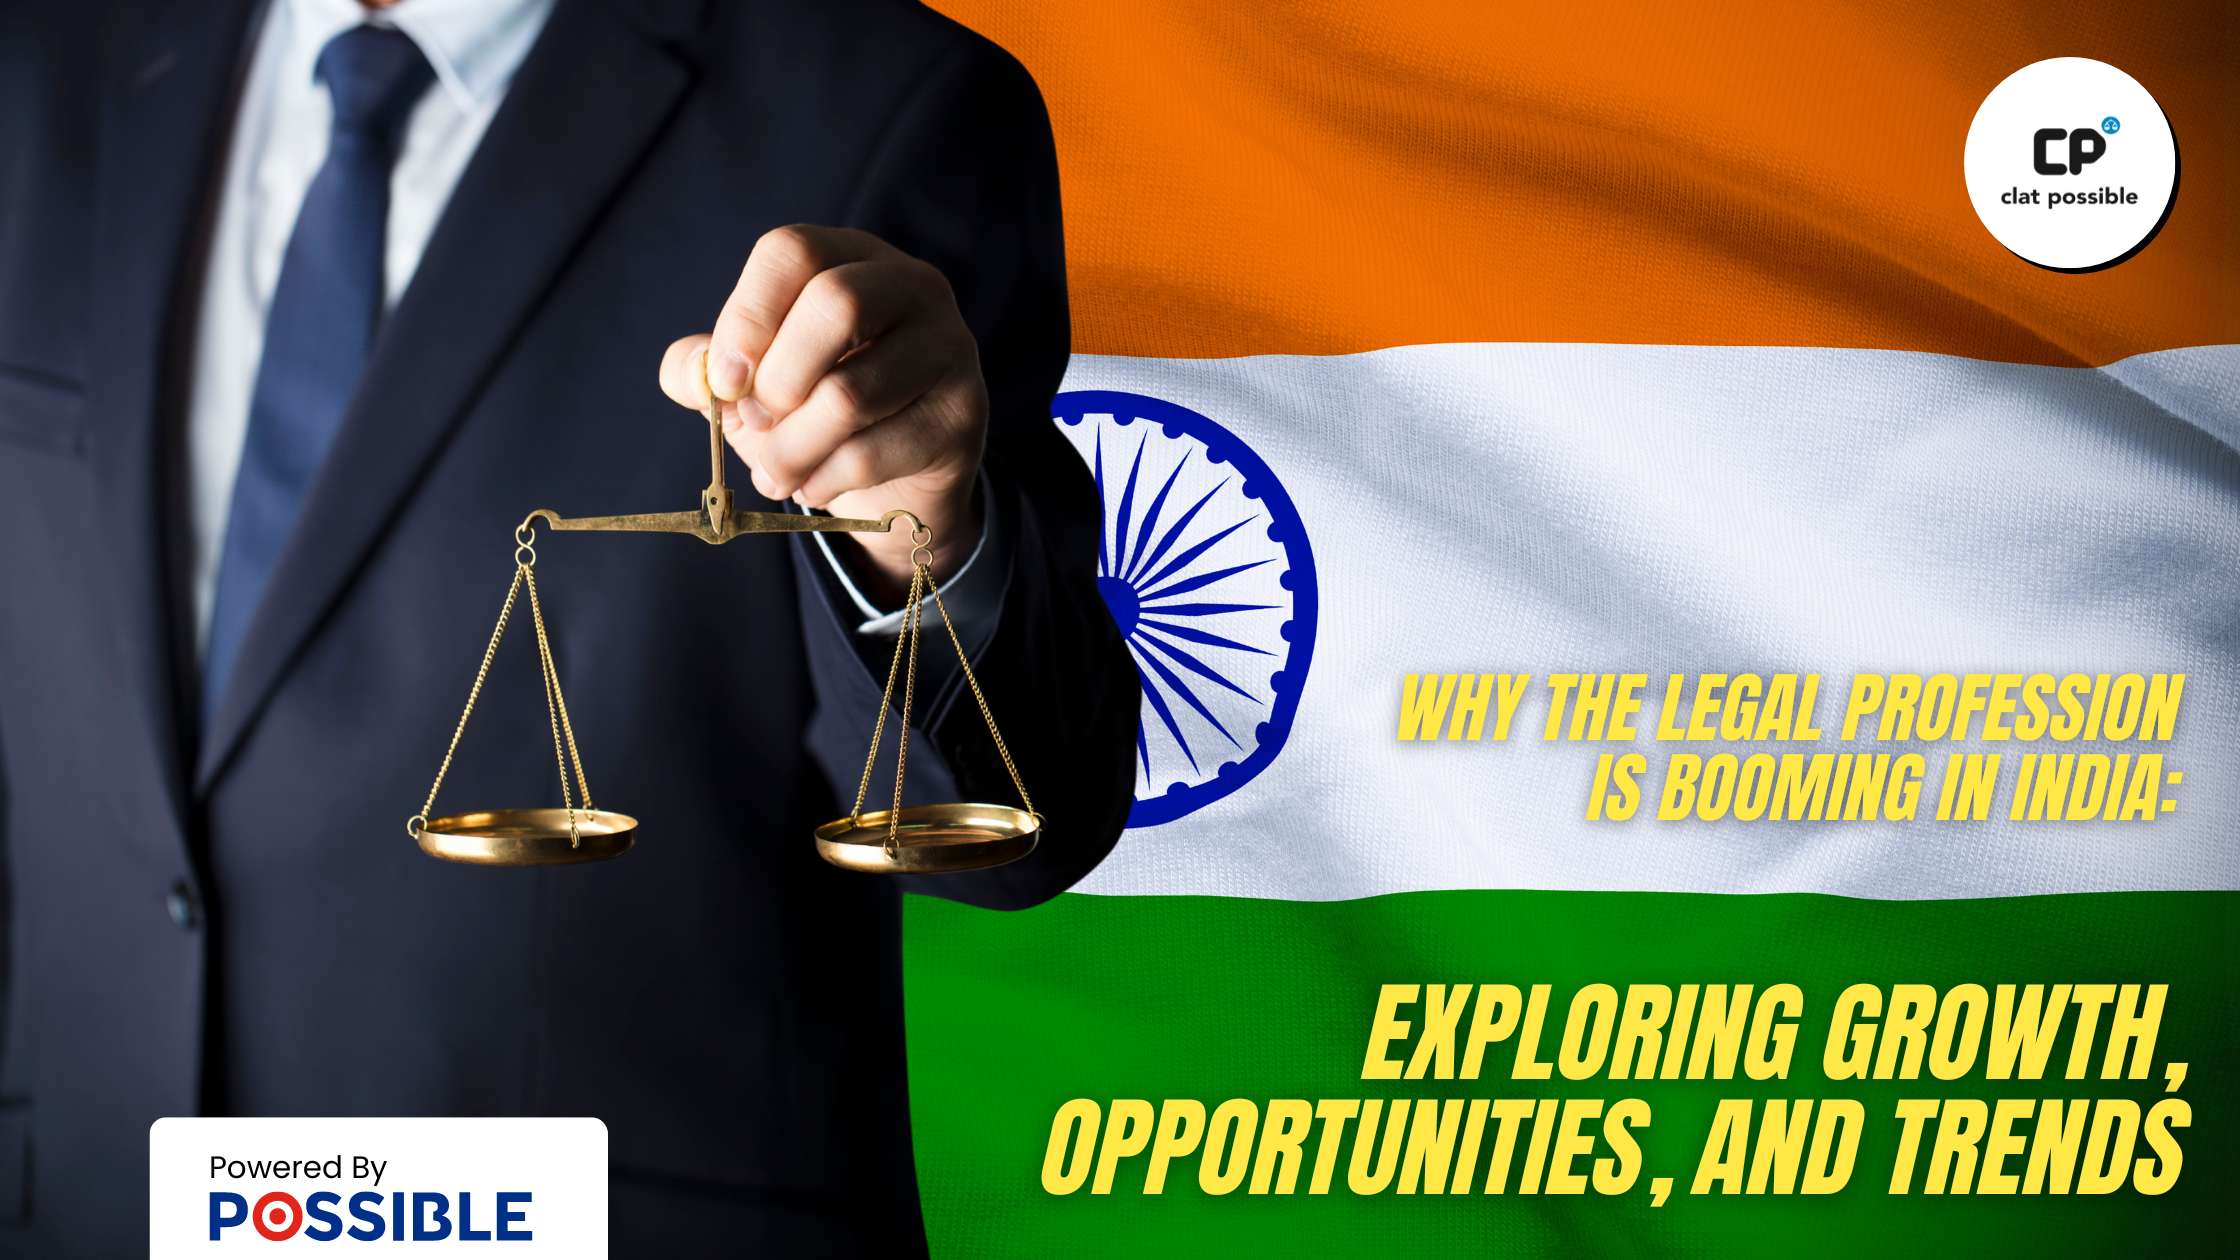 Why the Legal Profession is Booming in India: Exploring Growth, Opportunities, and Trends